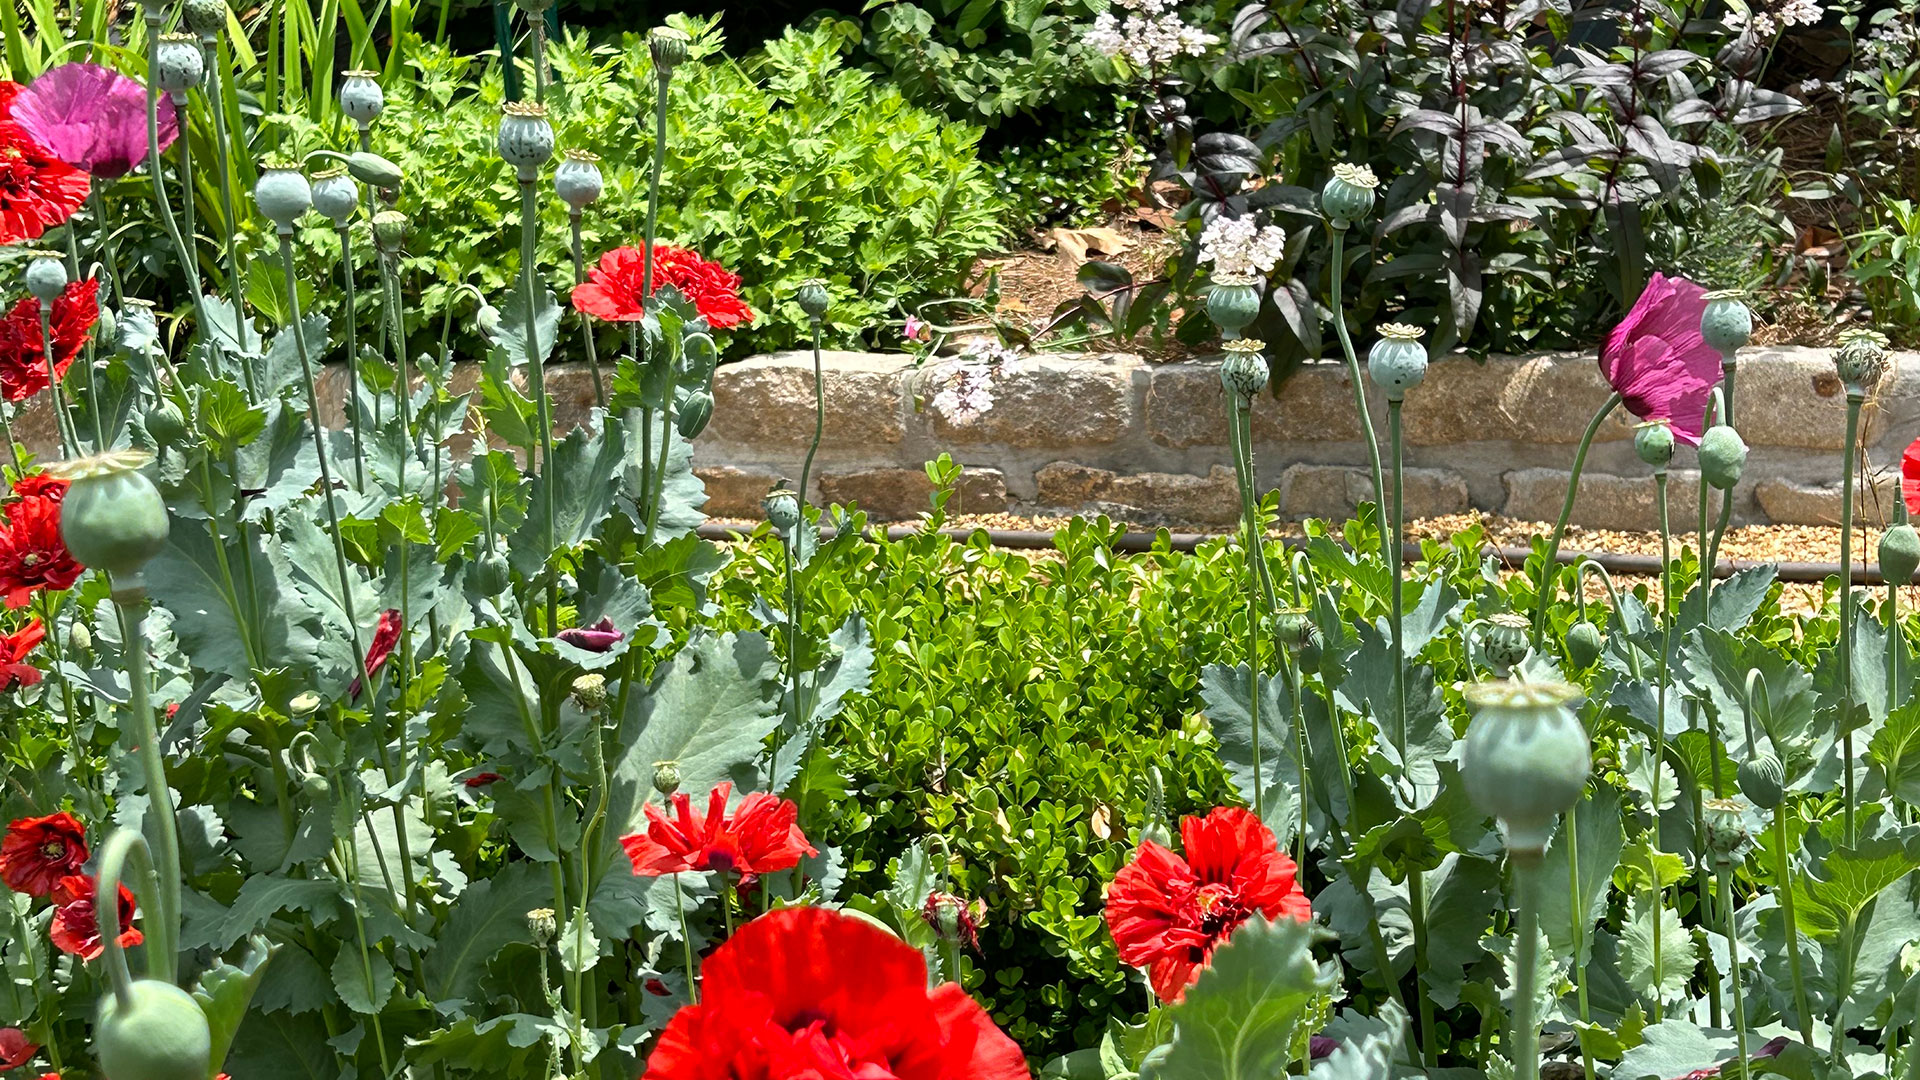 Beautiful, red poppy flowers from the Peachtree Road Cutting Garden in Atlanta.